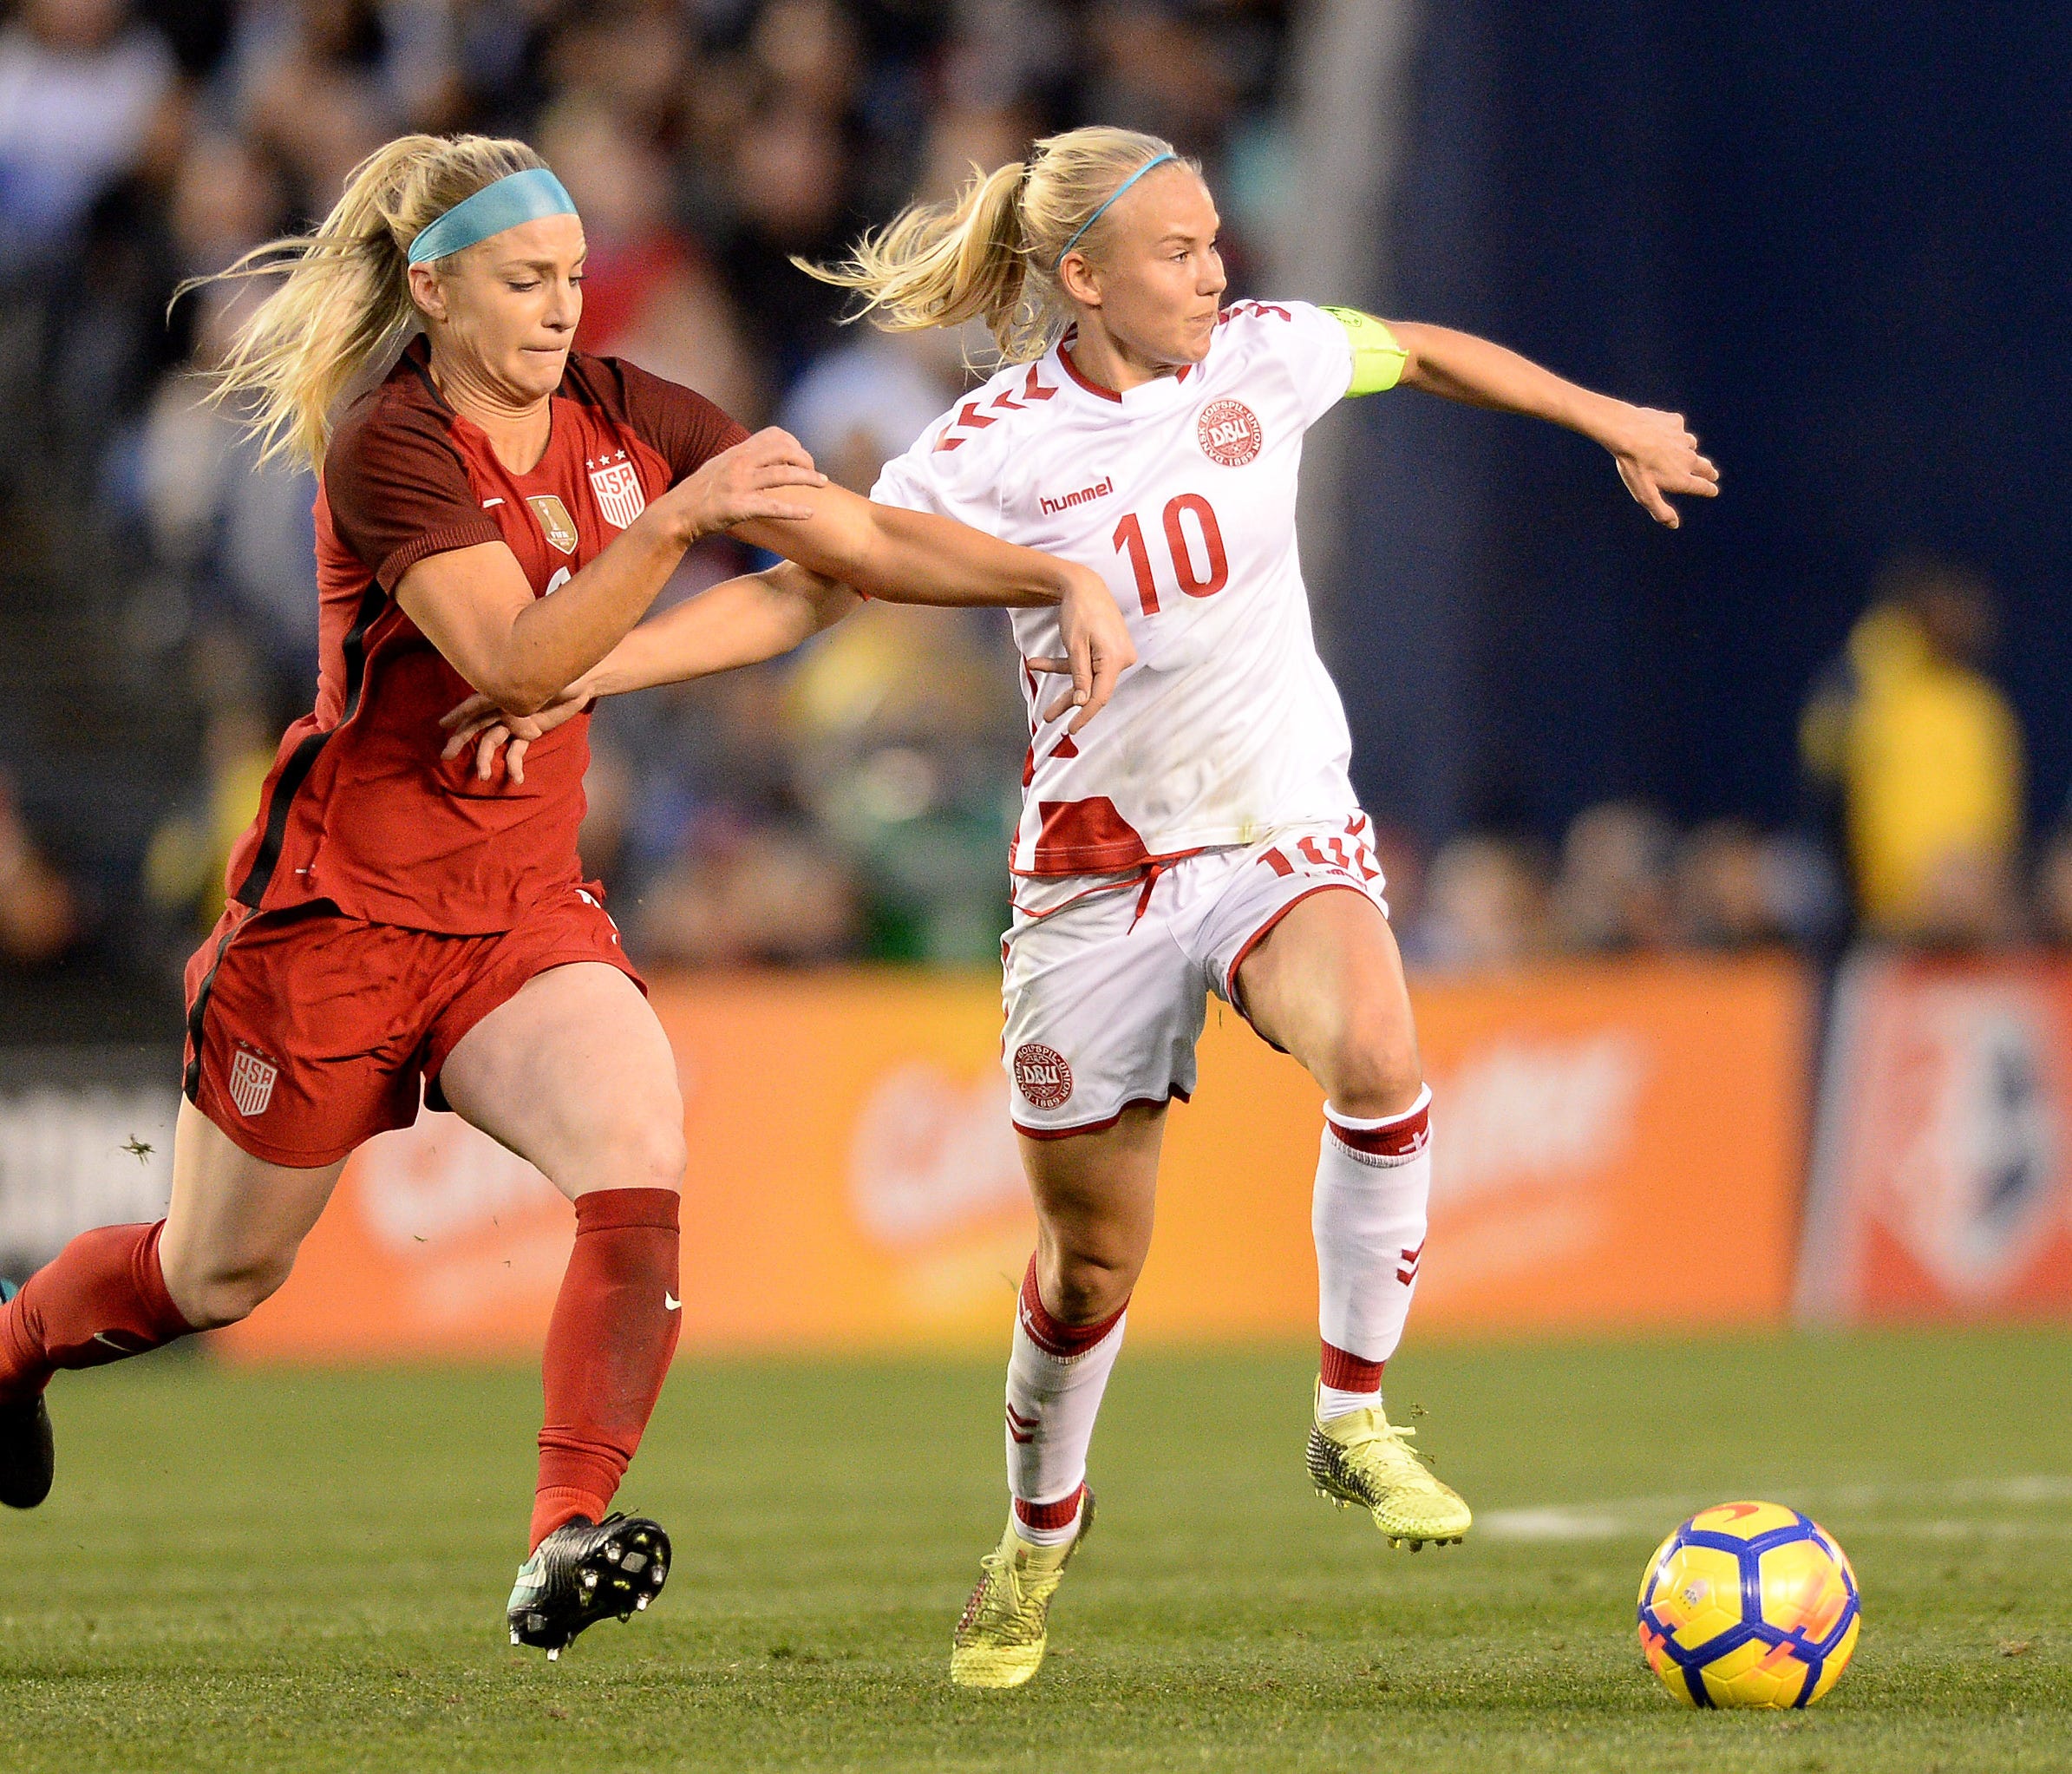 Jan 21, 2018; San Diego, CA, USA; United States midfielder Julie Ertz (8) and Denmark forward Pernille Harder (10) fight for possession of a ball during the first half at SDCCU Stadium. Mandatory Credit: Orlando Ramirez-USA TODAY Sports ORG XMIT: USA